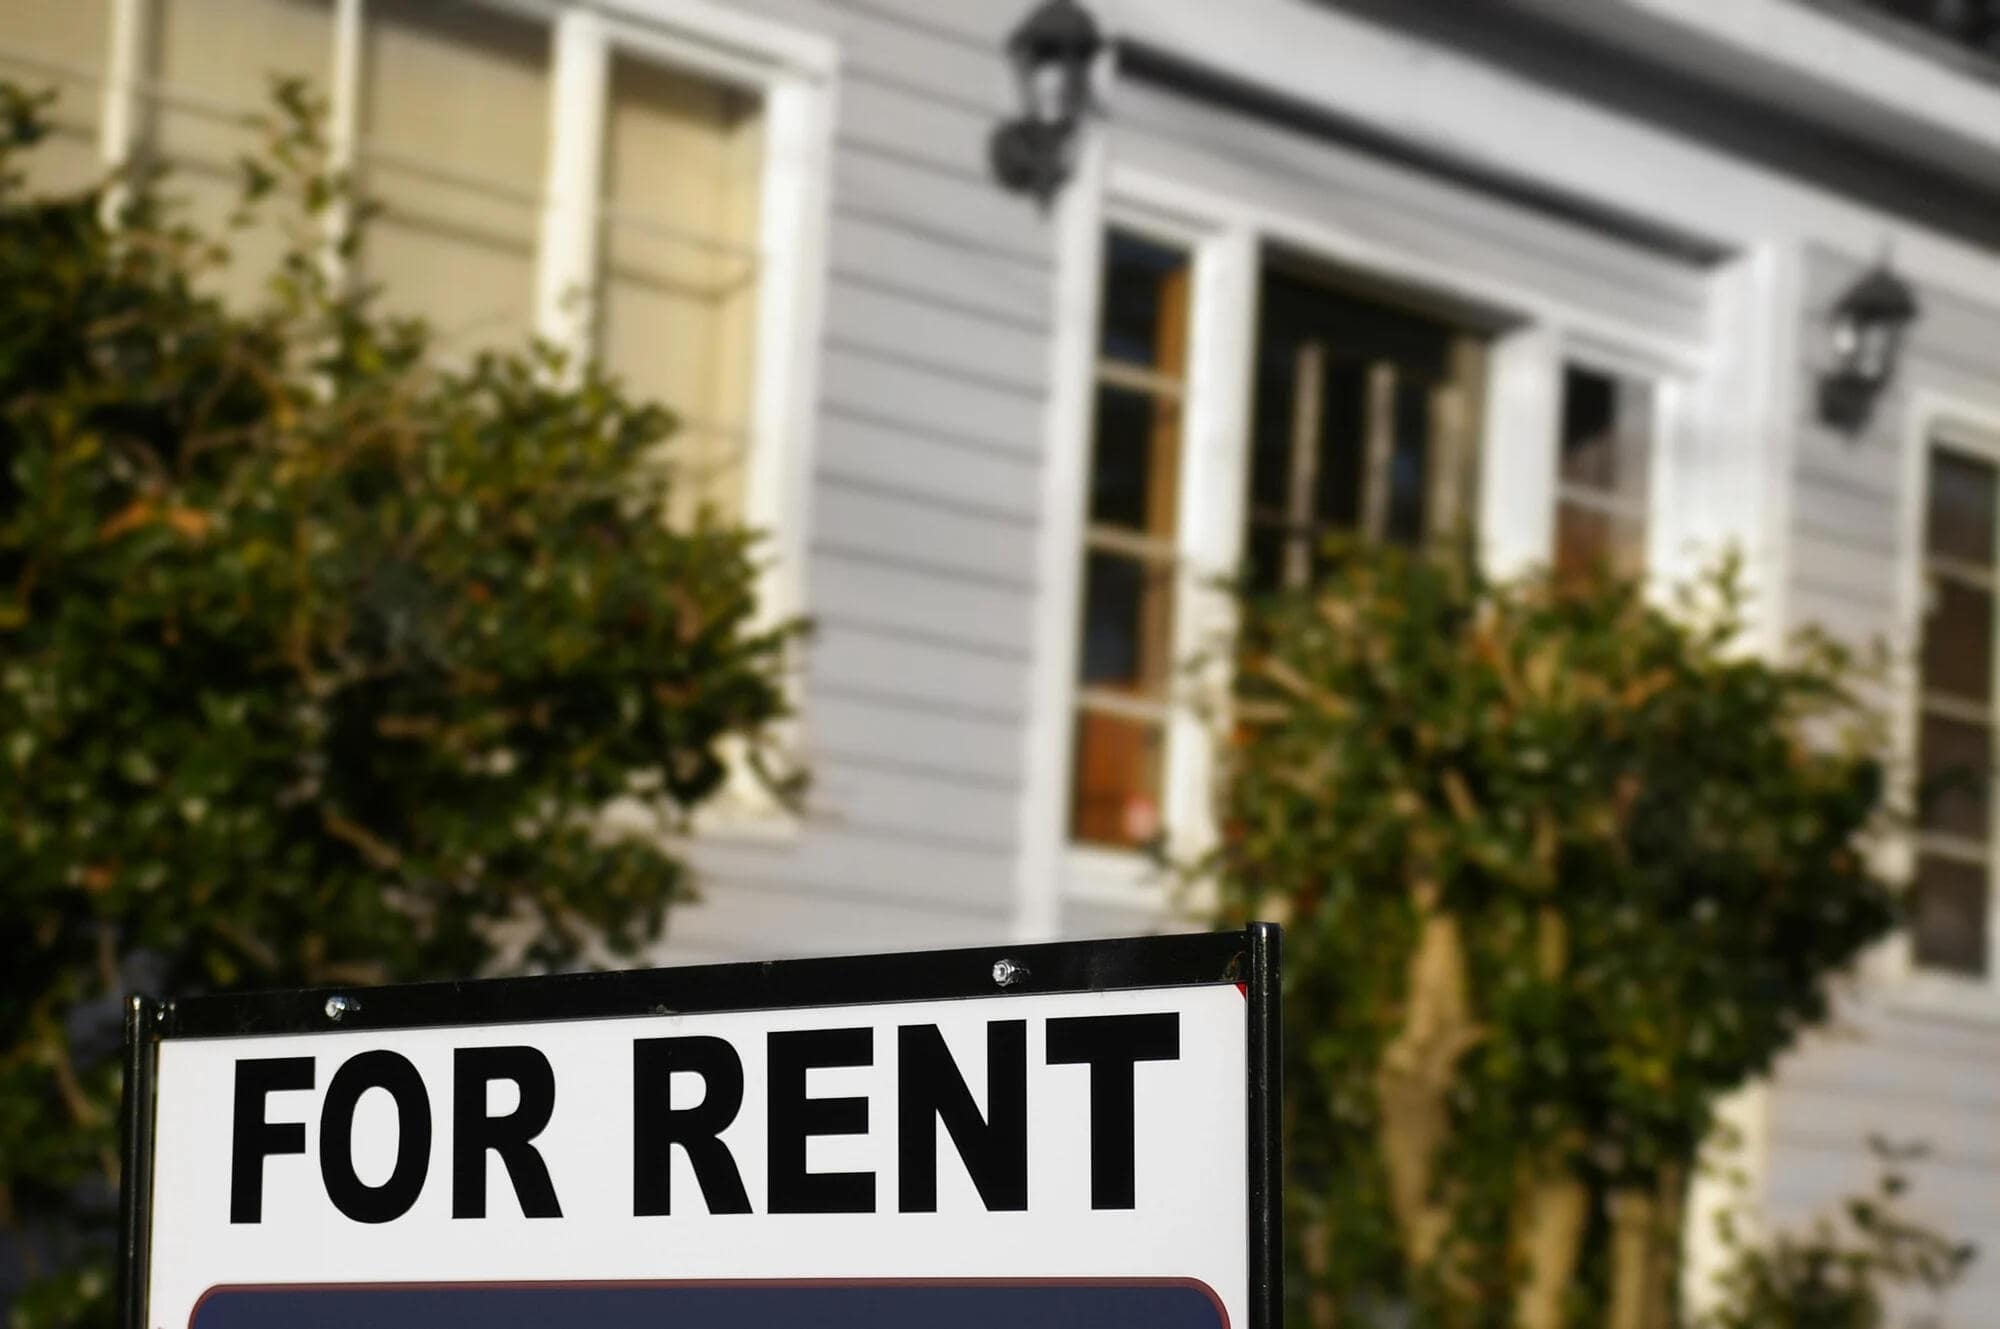 Listing Your Seacoast Home for Rent: A Step-by-Step Guide